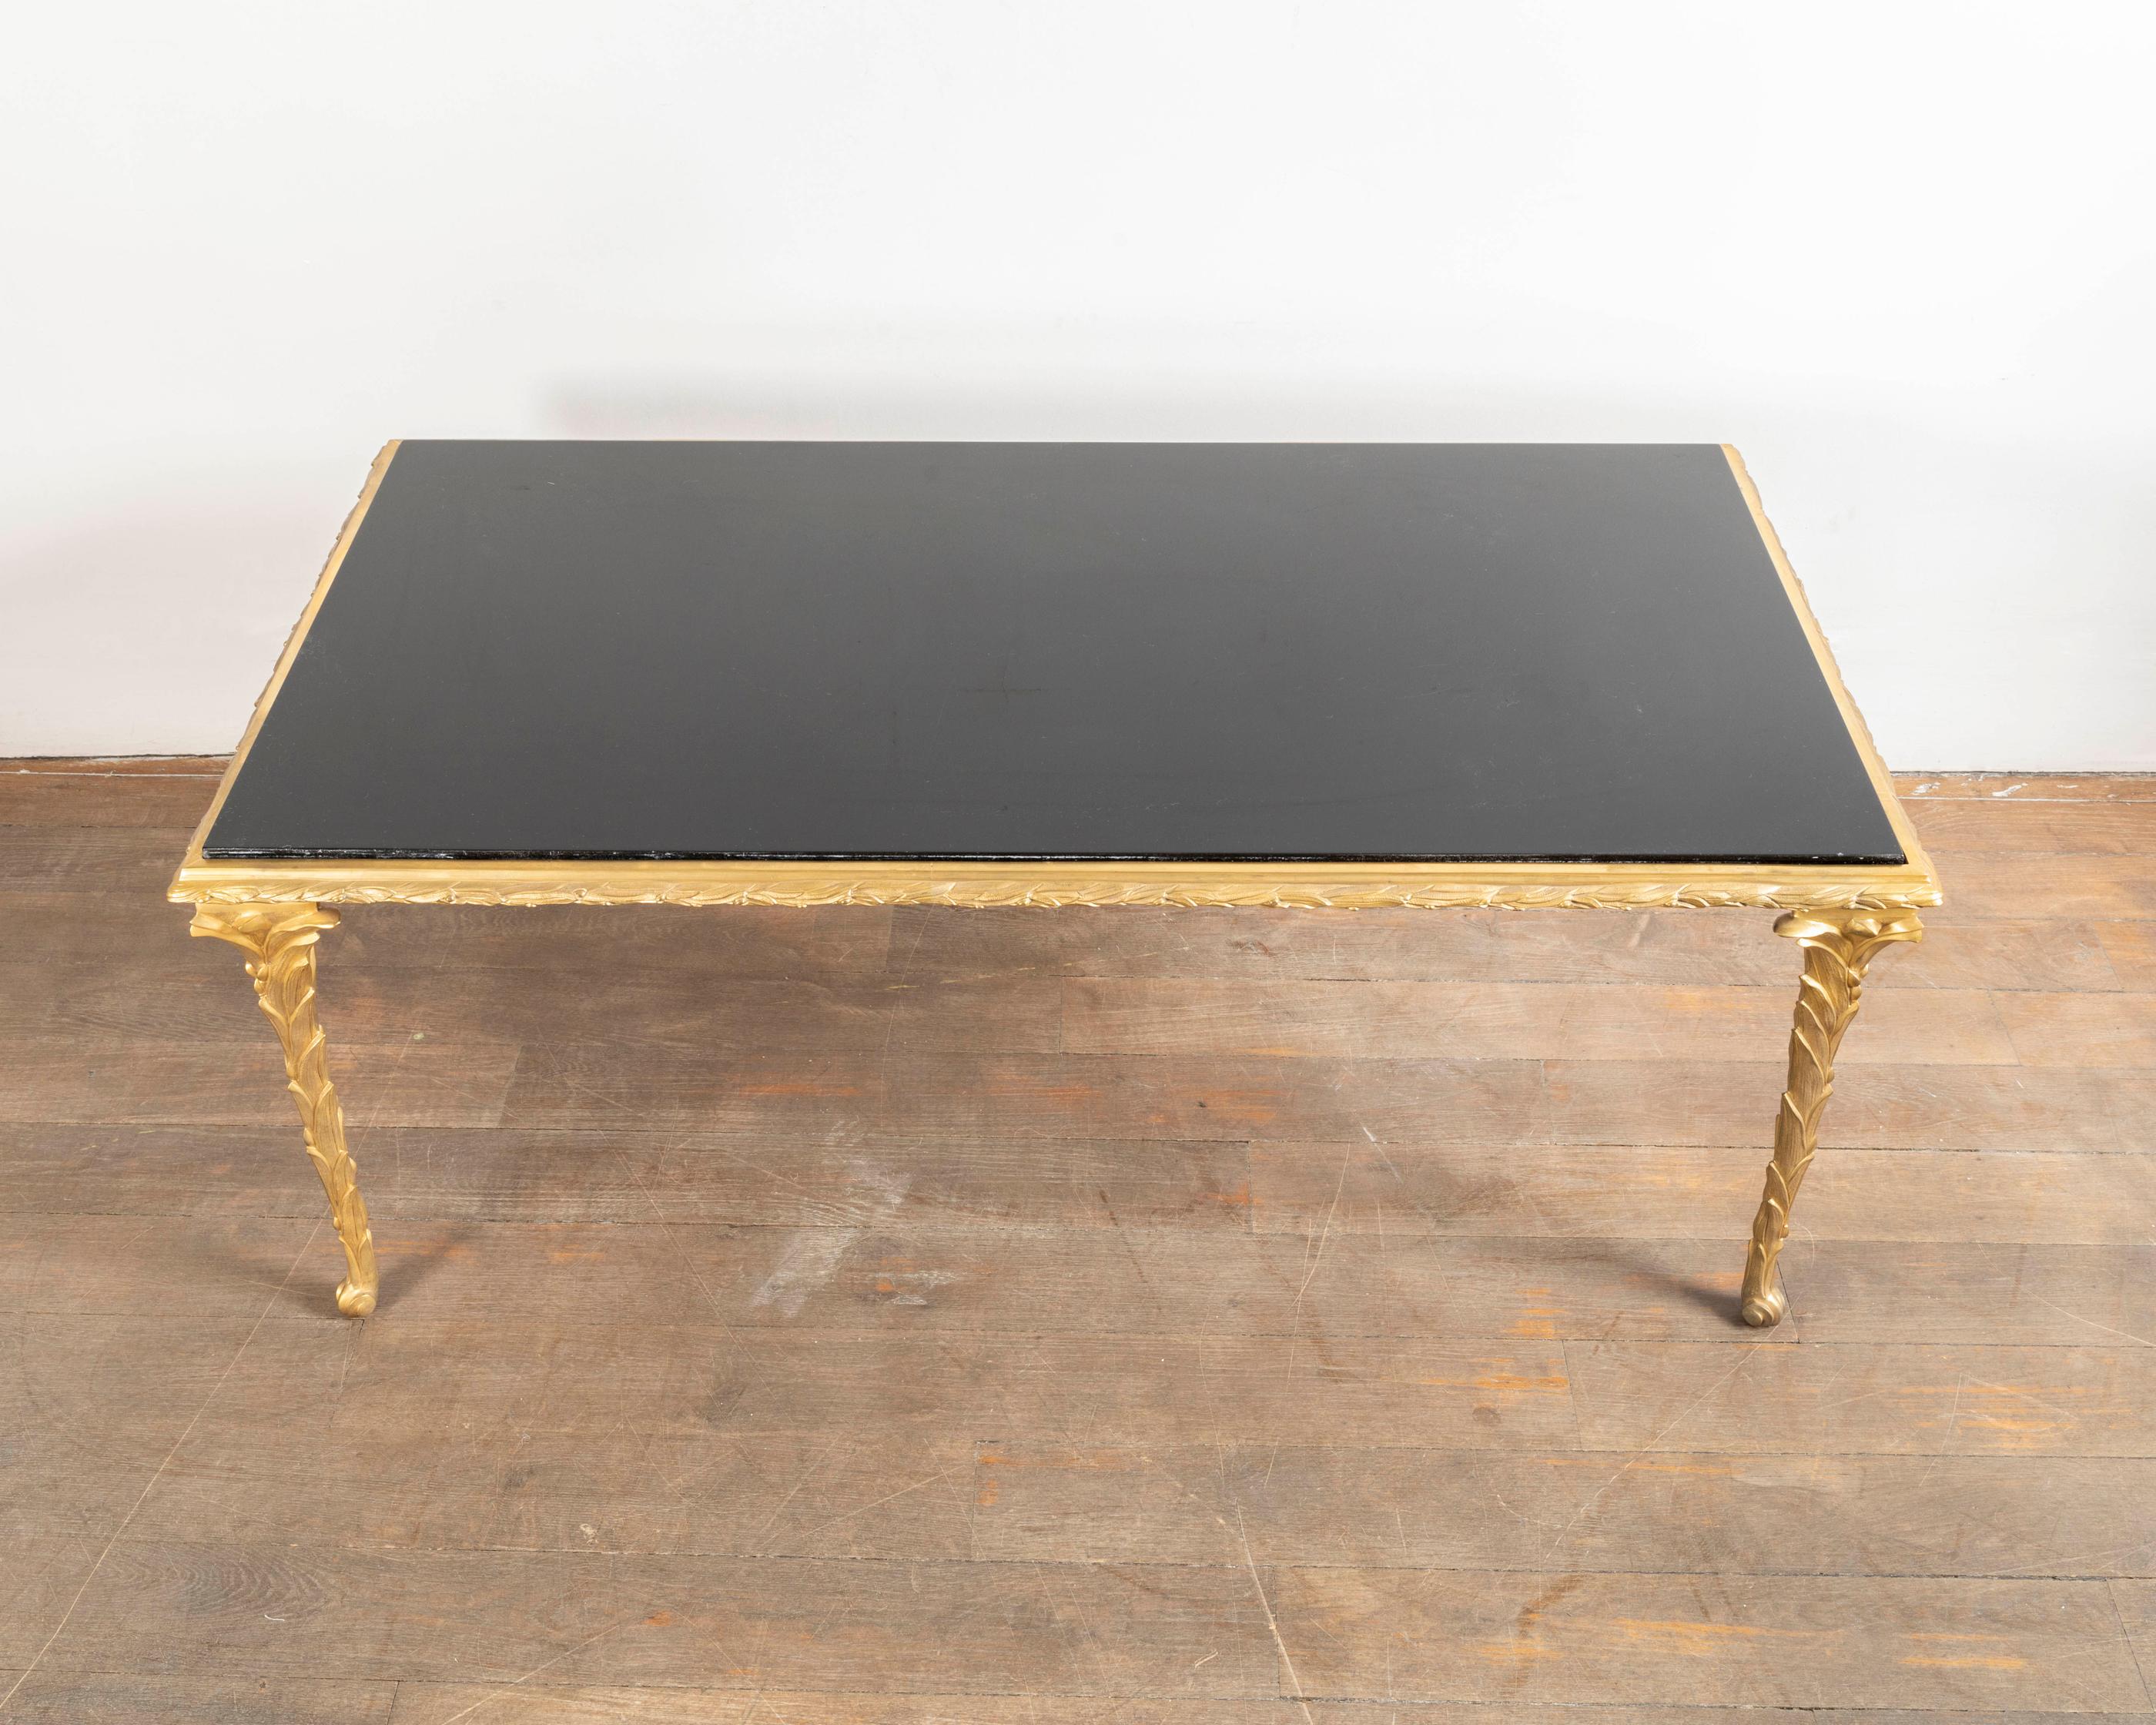 Coffee table, gild bronze feet and frame with palm leaf motive, black lacquer top,
Maison Baguès, France, circa 1950.